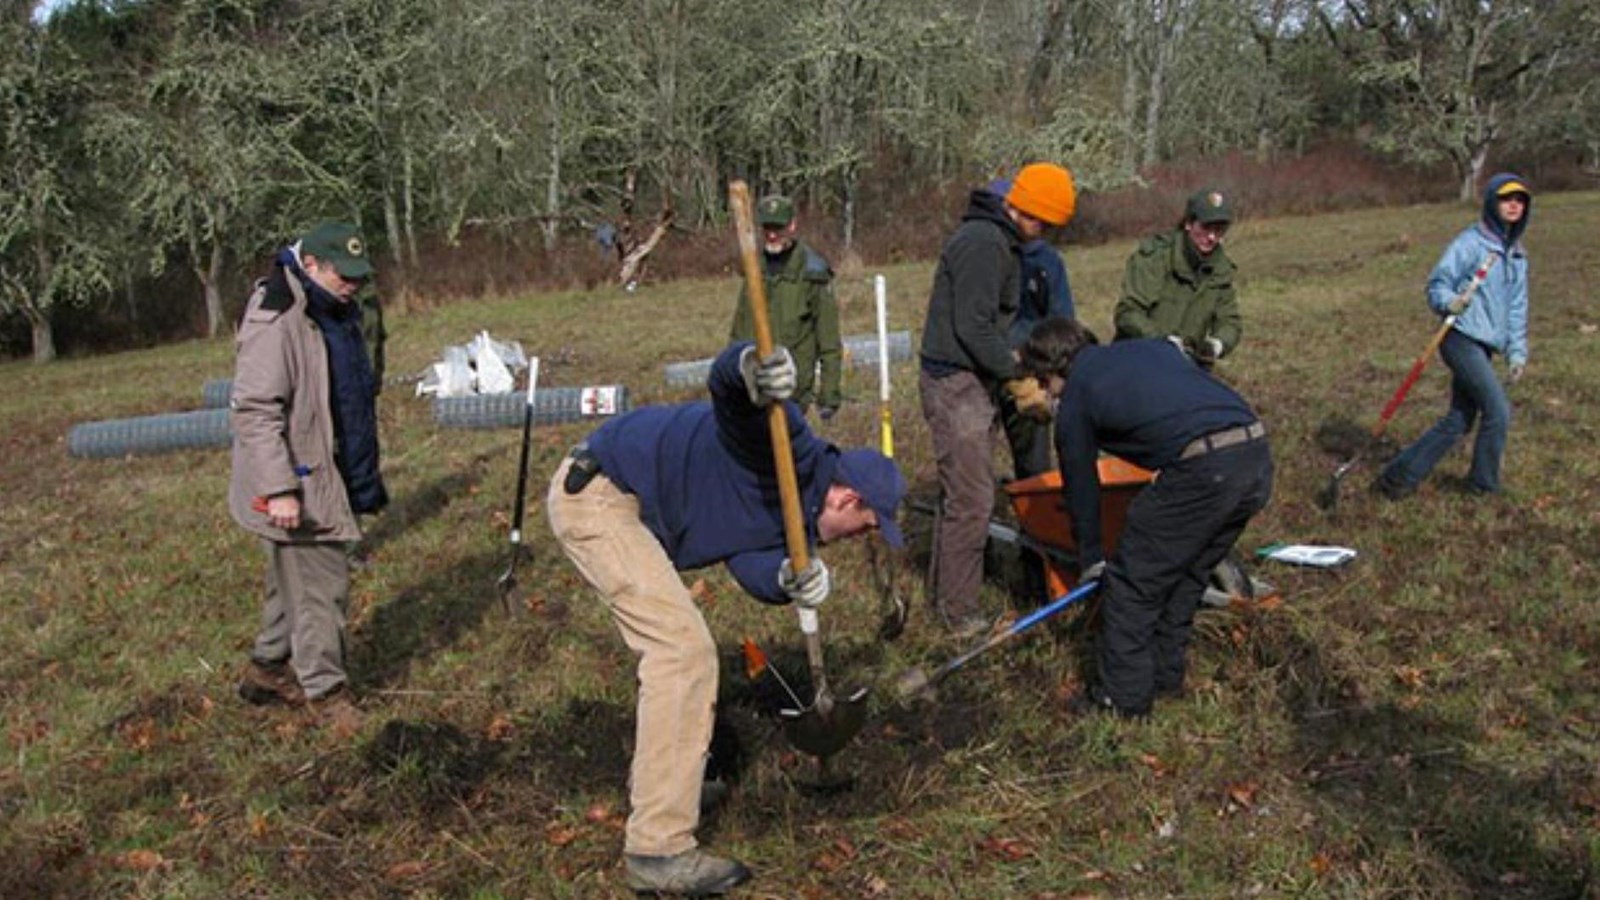 Color photograph of a group of six people on a green area engaged in planting a tree